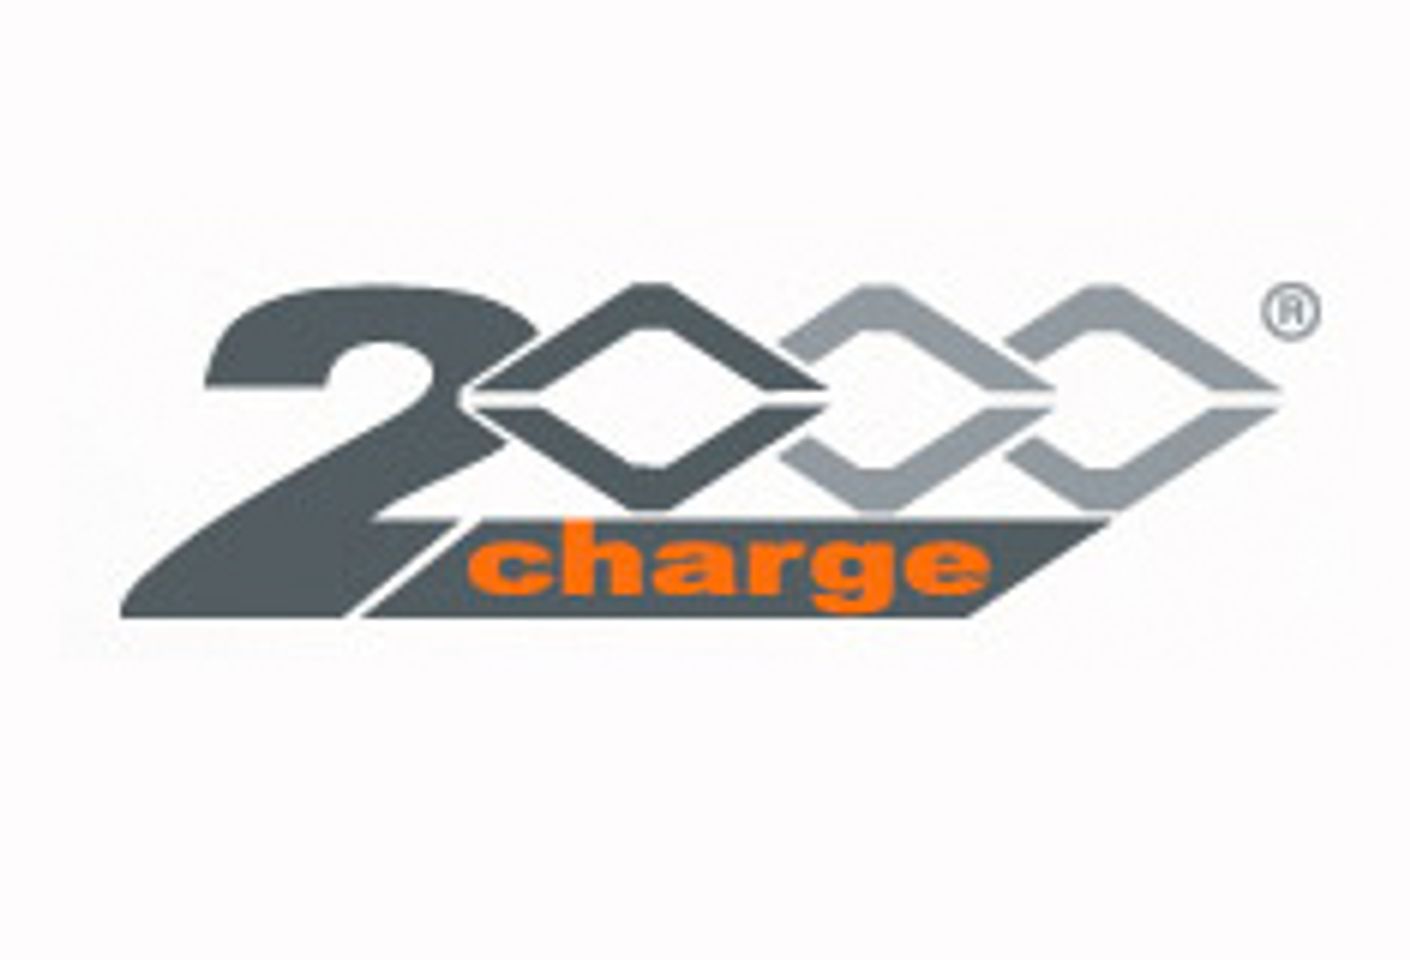 2000Charge Races to The Qwebec Expo